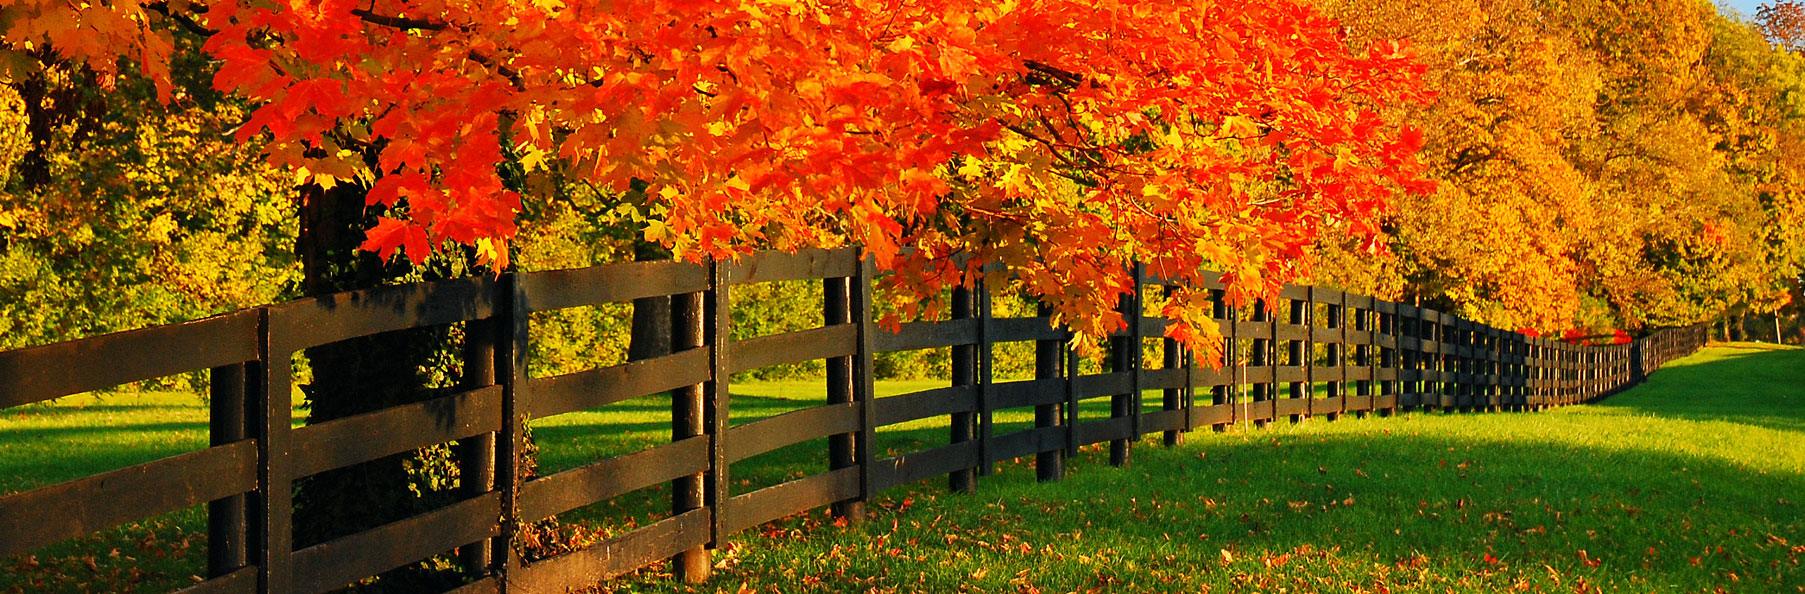 Trees turning yellow and red during fall all along a wooden fence